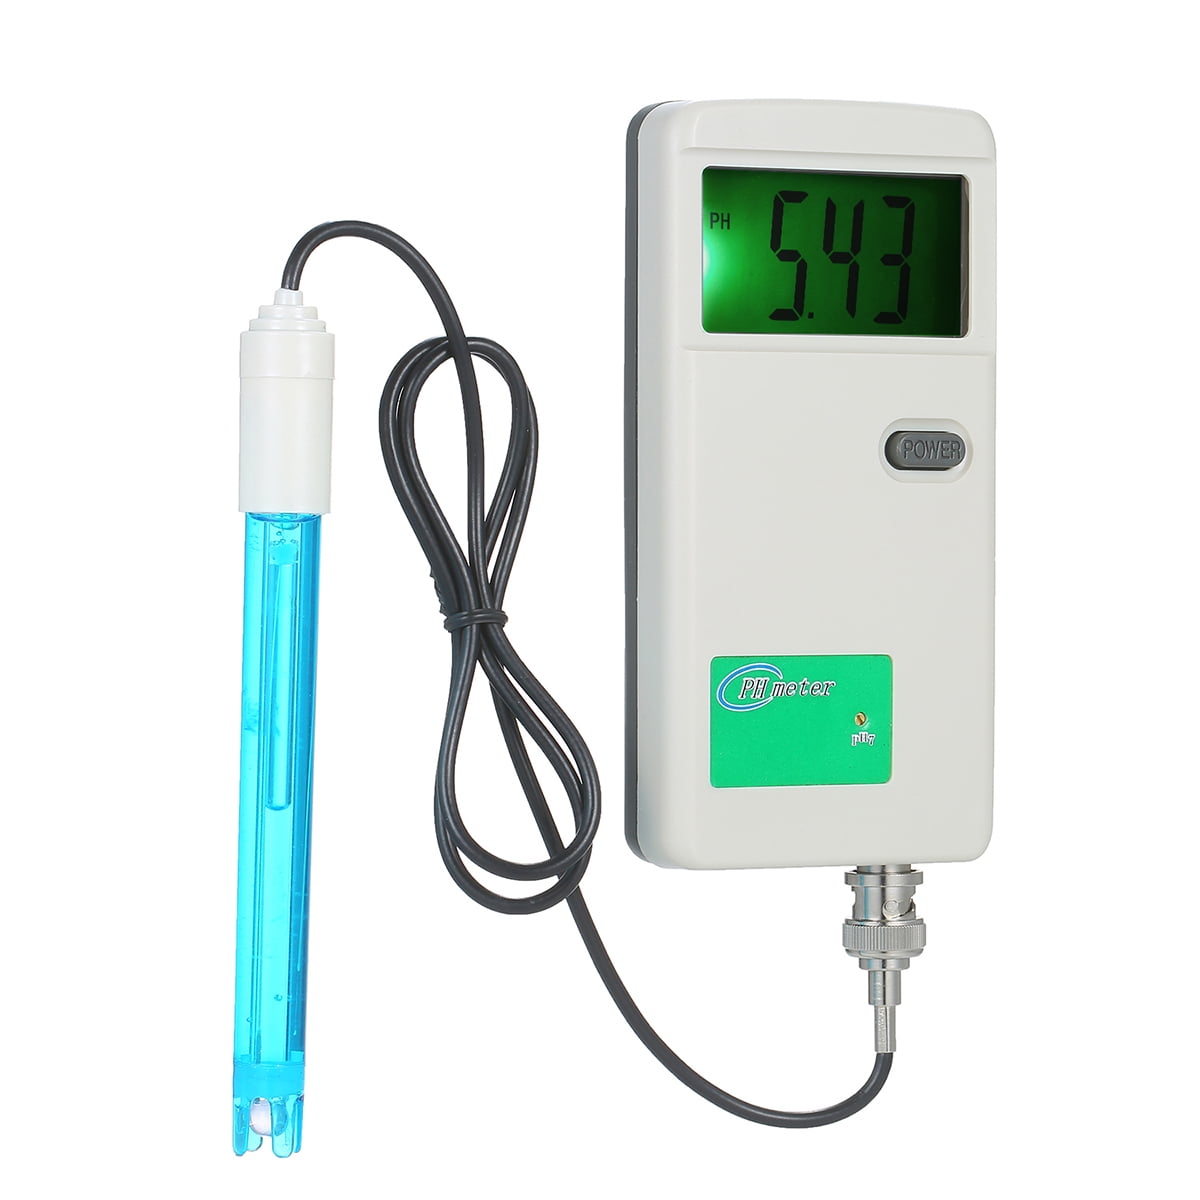 PH Meter Digital Water Analysis Meter Portable Electronic Tester with Backlight